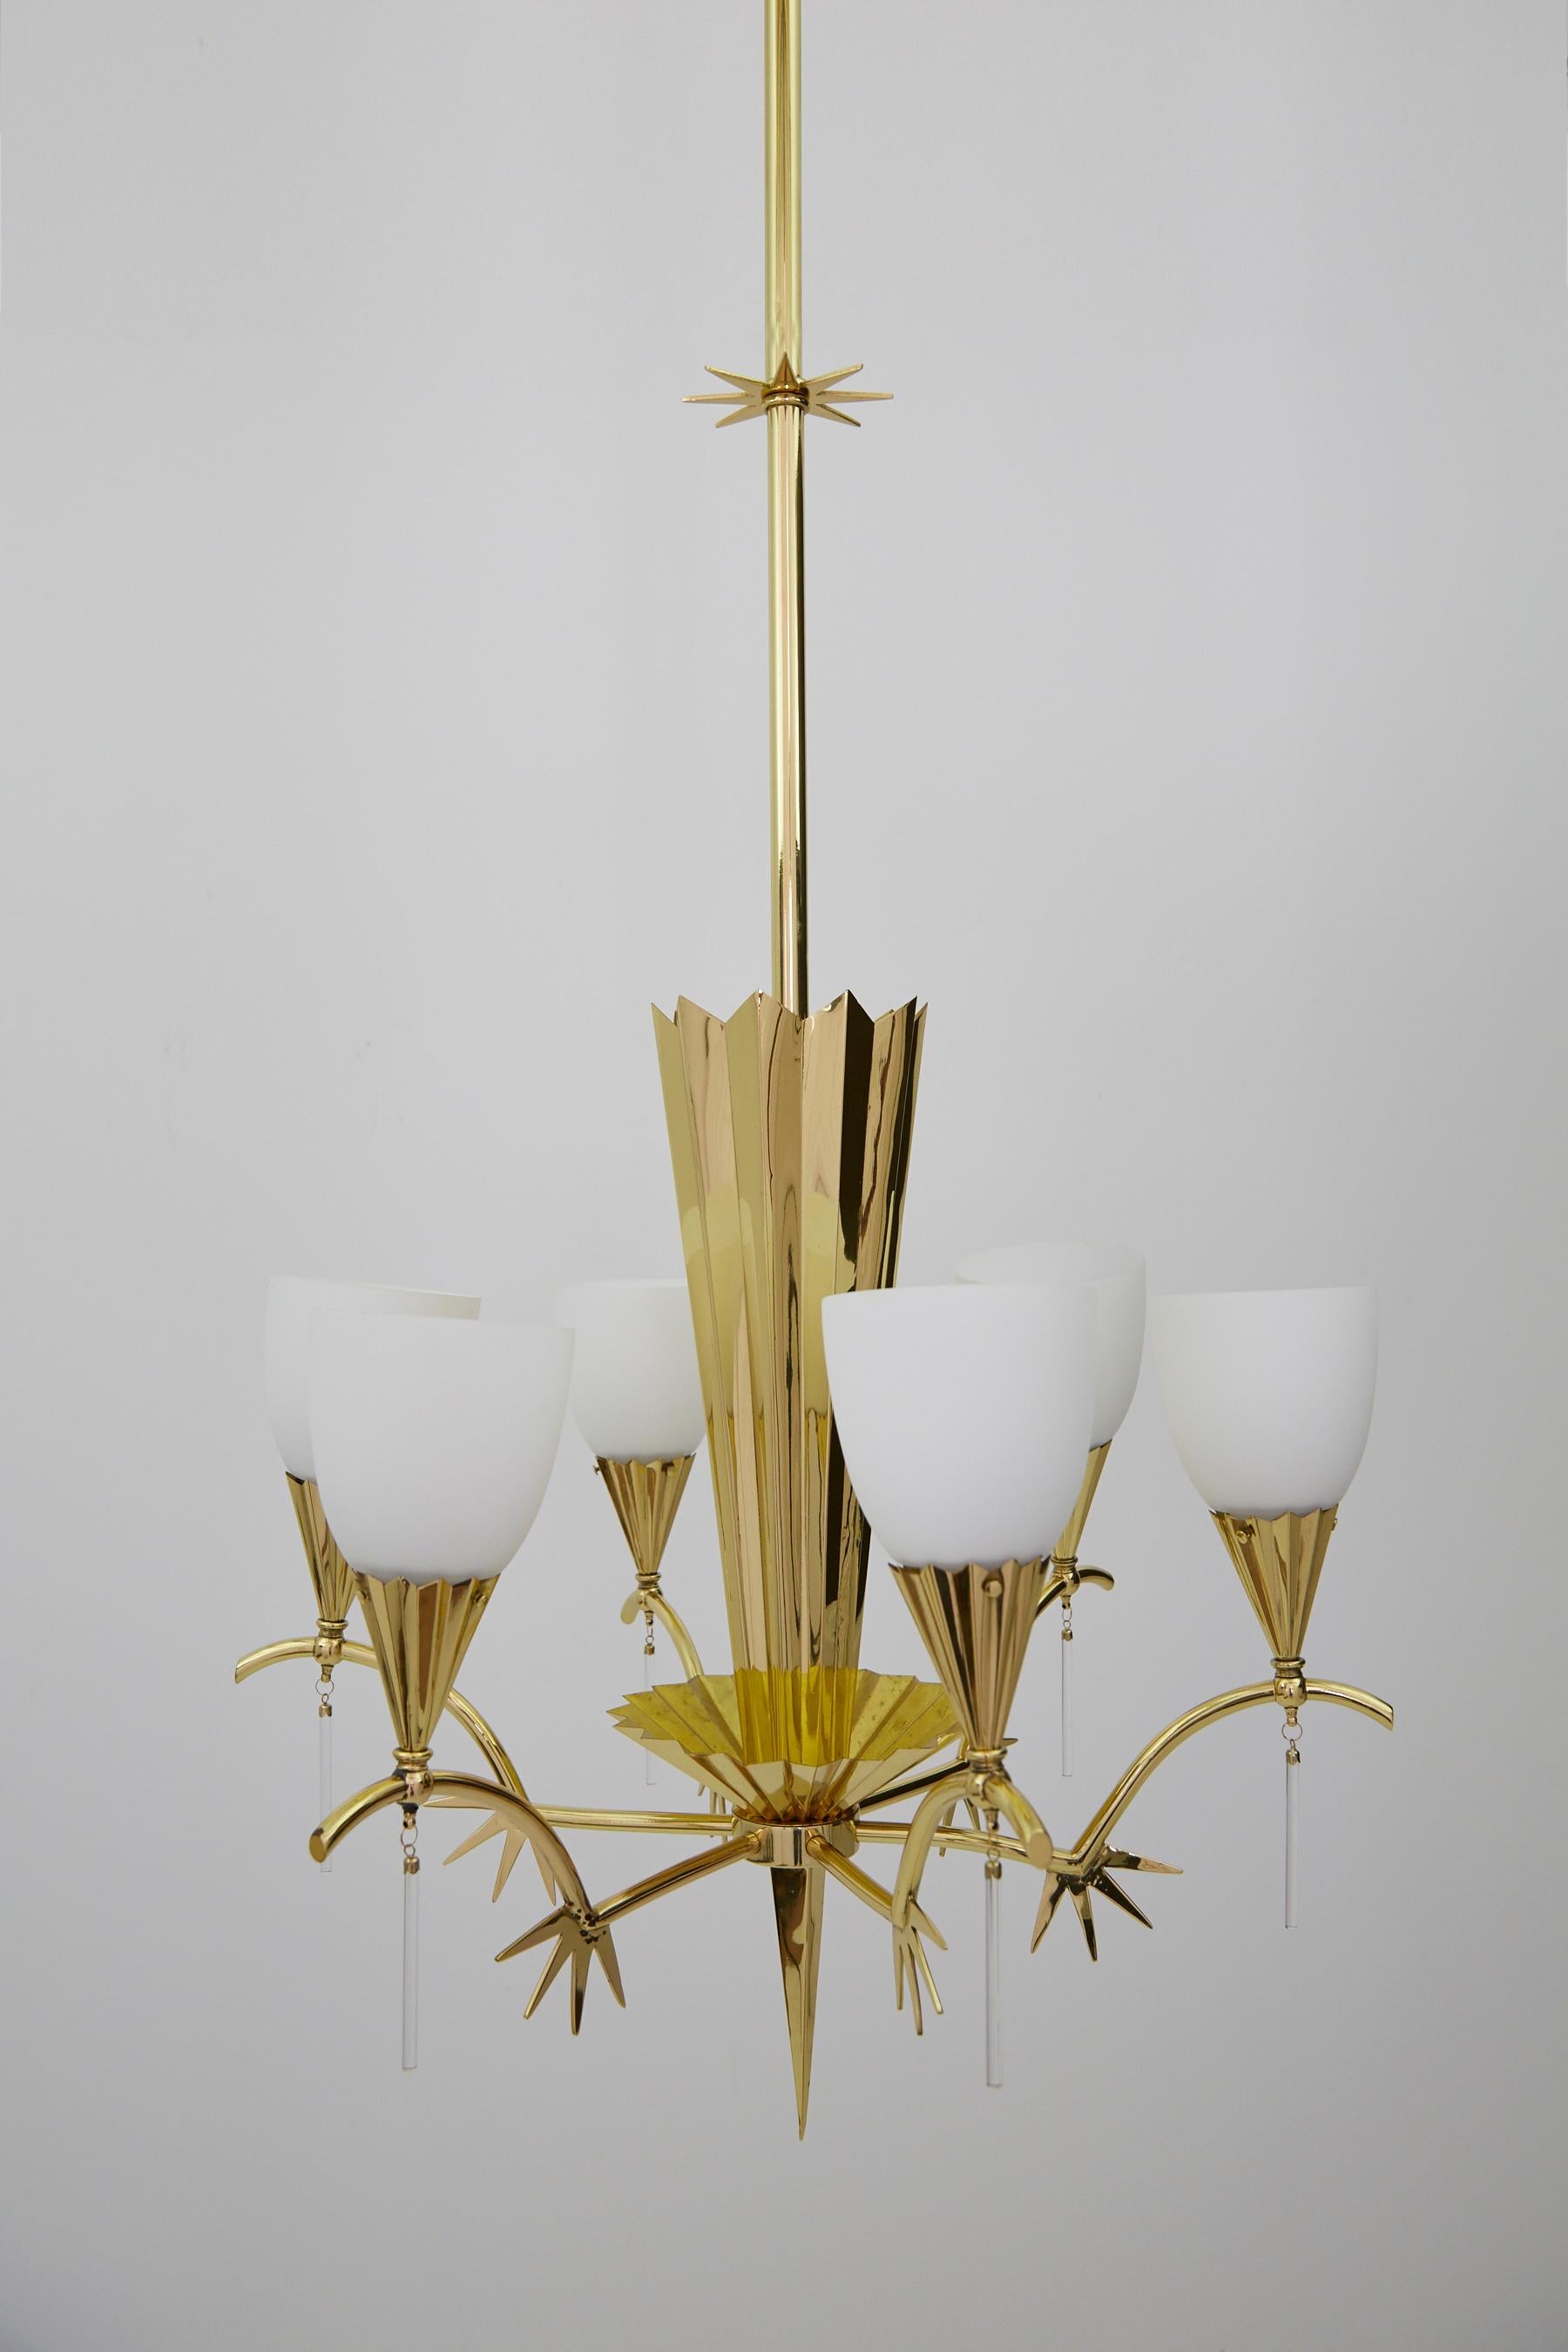 Six-Arm Italian Brass Chandelier with Decorative Spikes, 1940s For Sale 10